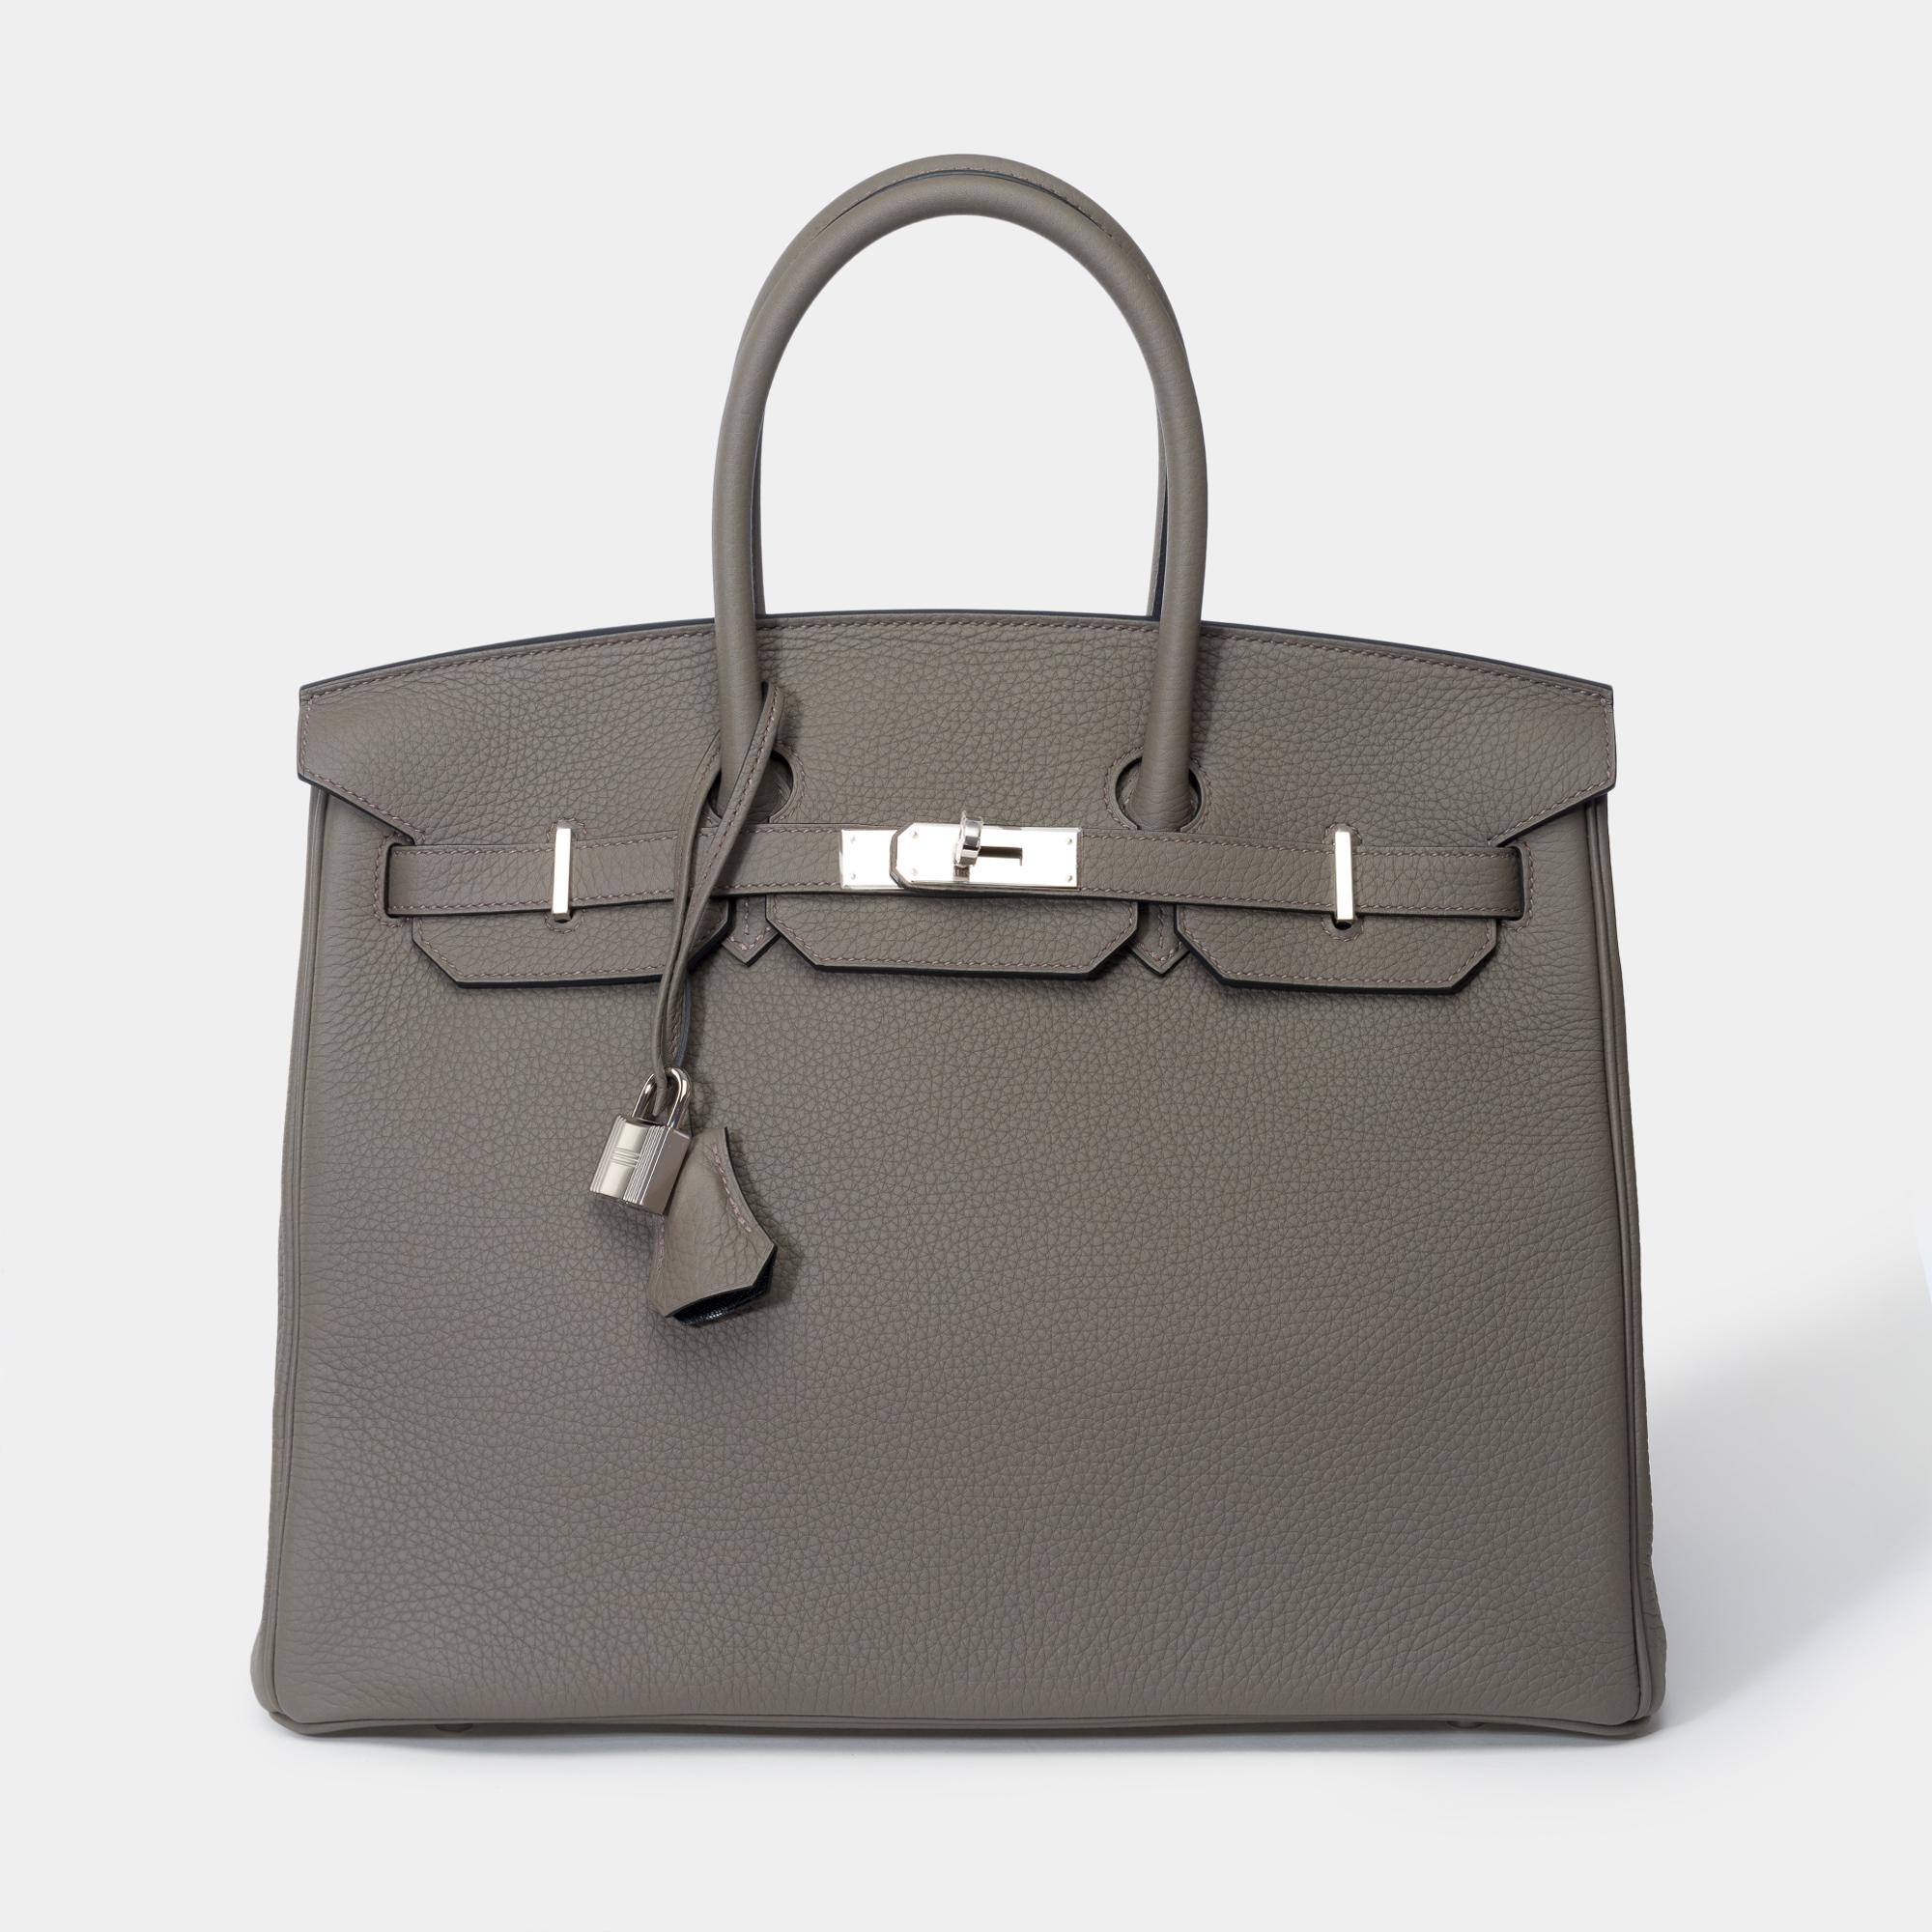 Exceptional & Rare Hermes Birkin 35 Special Order (HSO) in Etain Togo leather and black interior, palladium silver metal trim, double grey leather handle for hand carry

Flap closure
Black leather lining, zip pocket, patch pocket
Signature: 